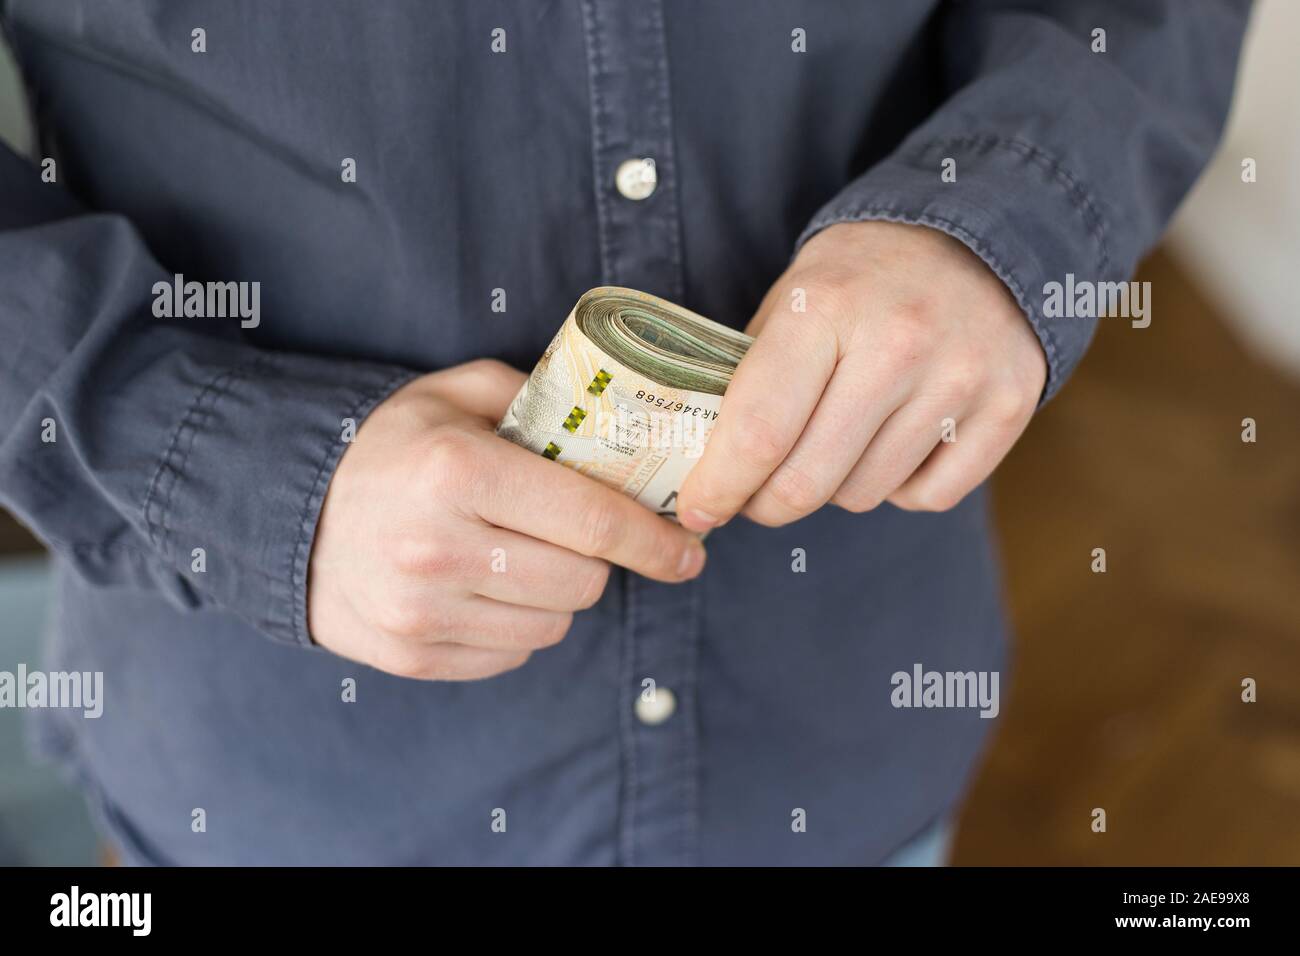 Confused man with a bundle of Polish money in his hand Stock Photo